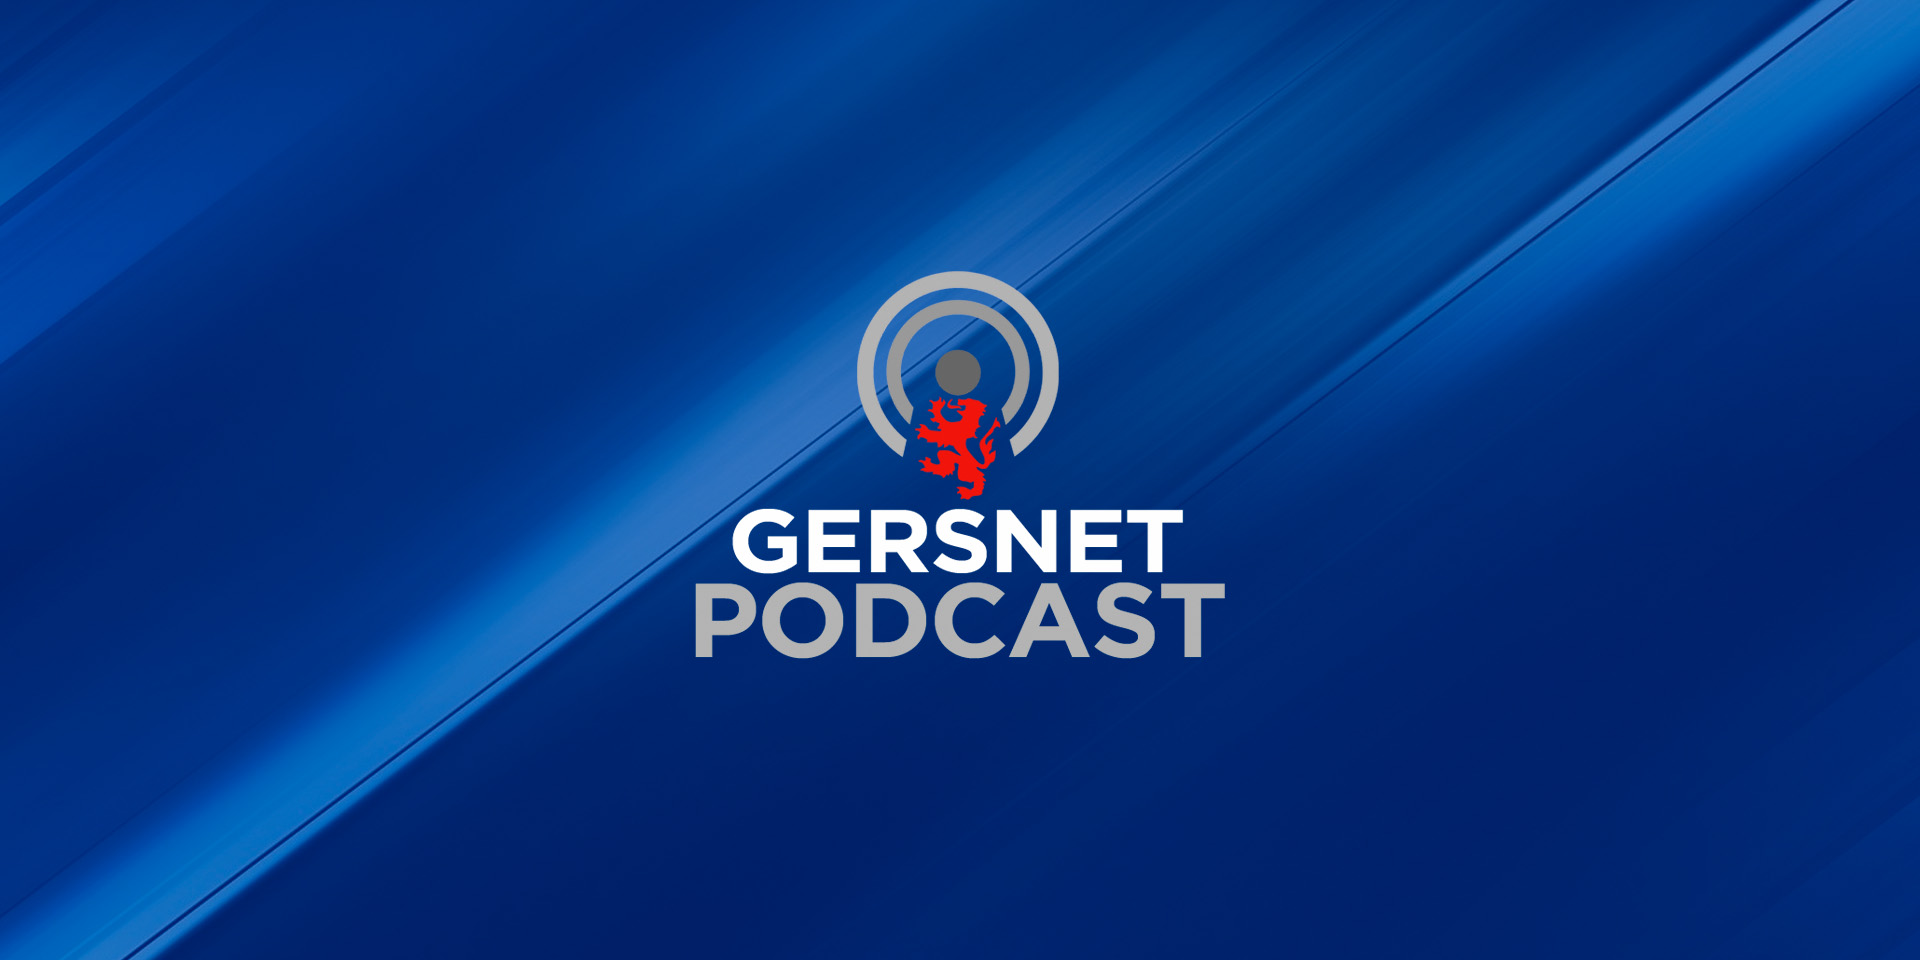 Gersnet Podcast 275 - Opening Day Disappointment